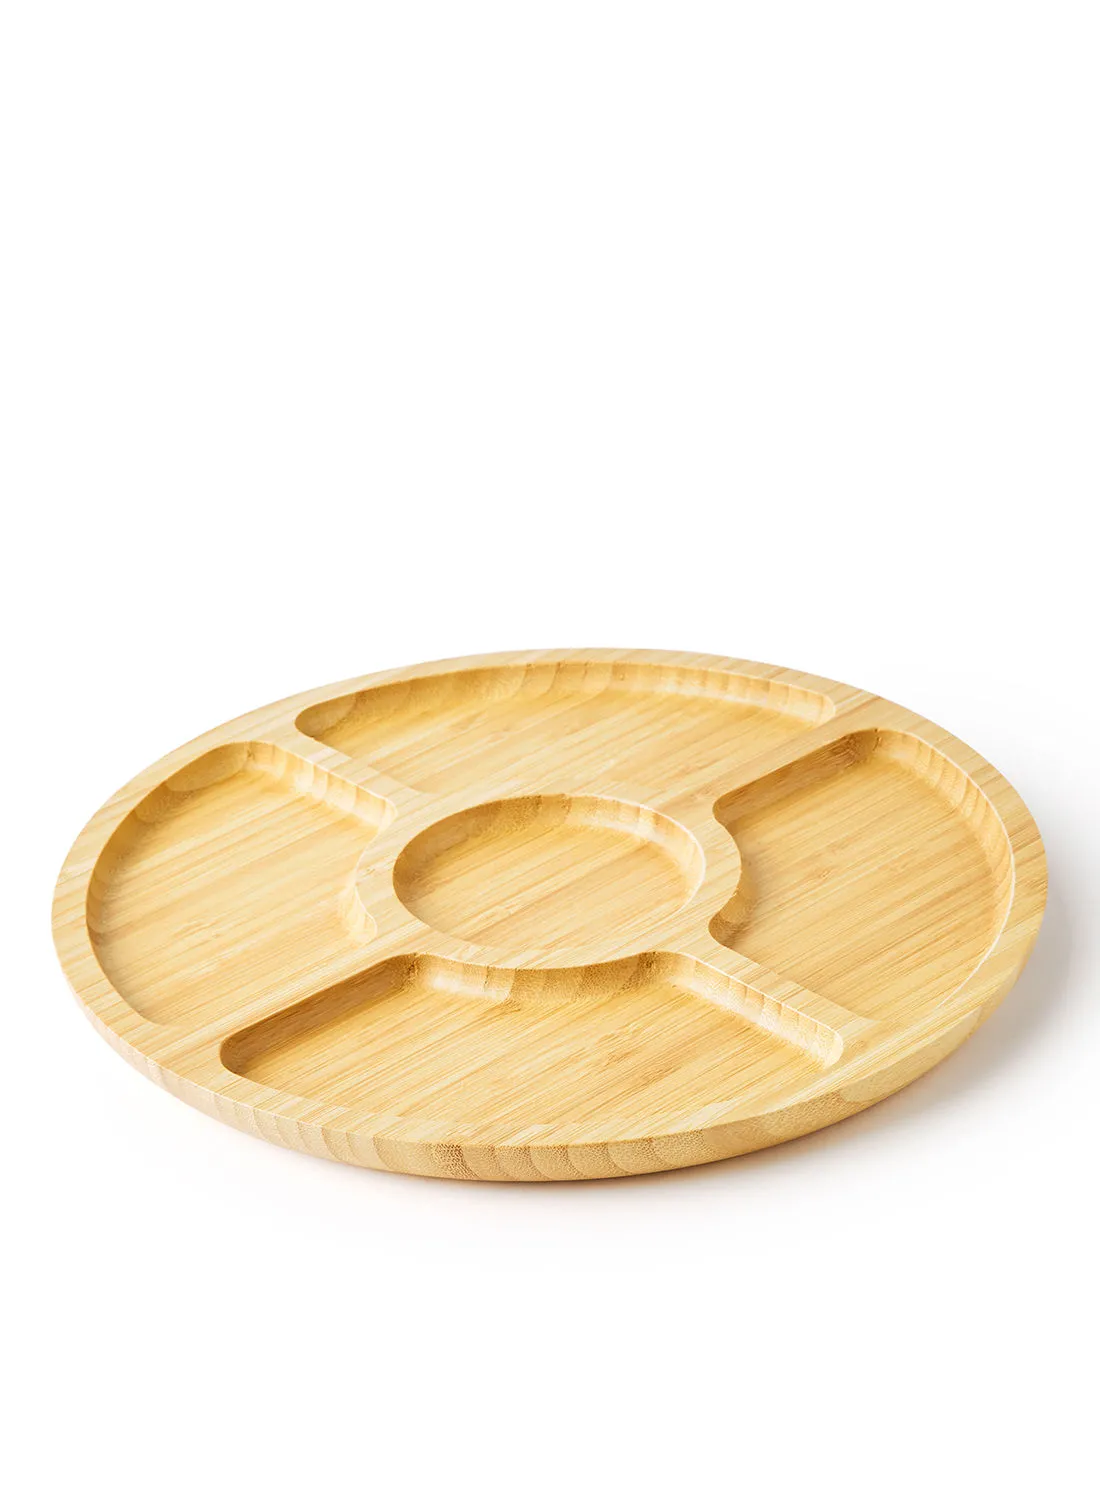 noon east Chip And Dip Platter - Made Of Bamboo - Round - Serving Plate - Serving Dishes - Tray - Brown